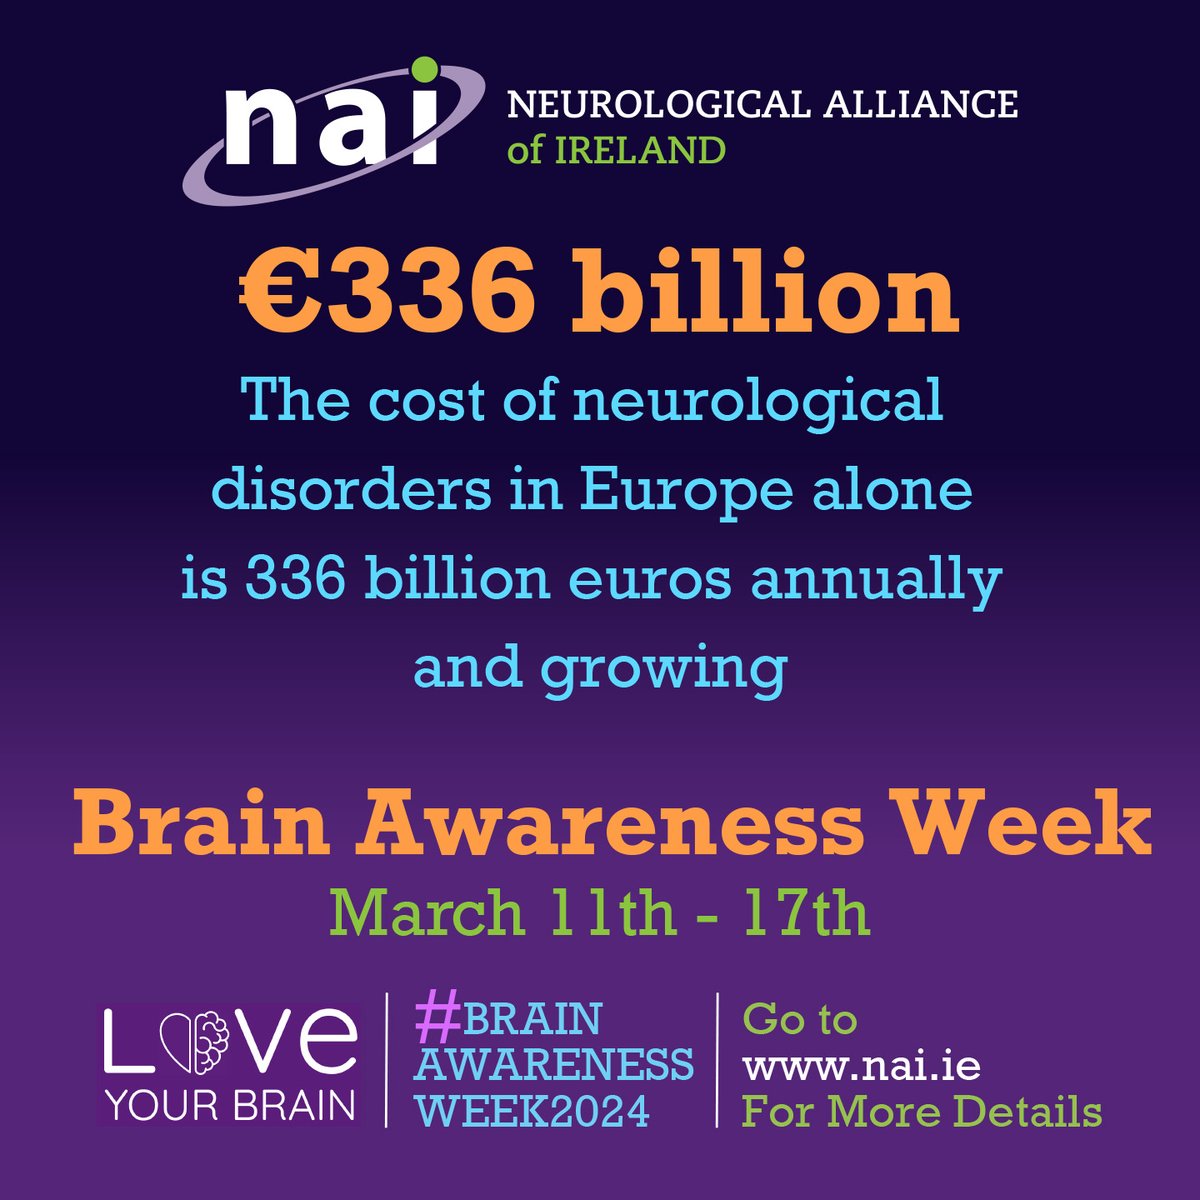 Did you know that the cost of neurological disorders in Europe alone is 336 billion euros annually and growing? Show your support this #brainawarenessweek2024 and help us promote the need for more investment in services #loveyourbrain